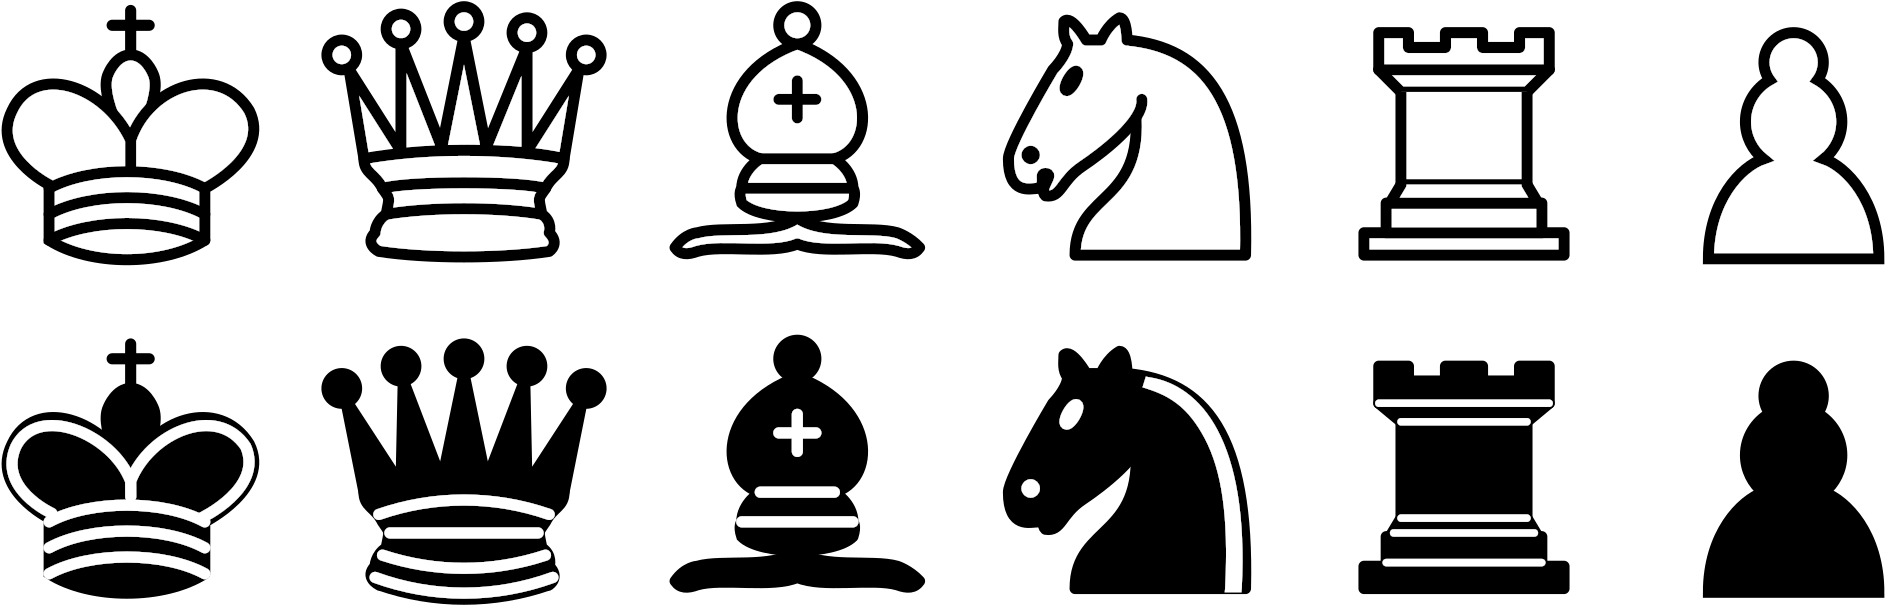 Open - Chess Pieces To Draw (2000x667)